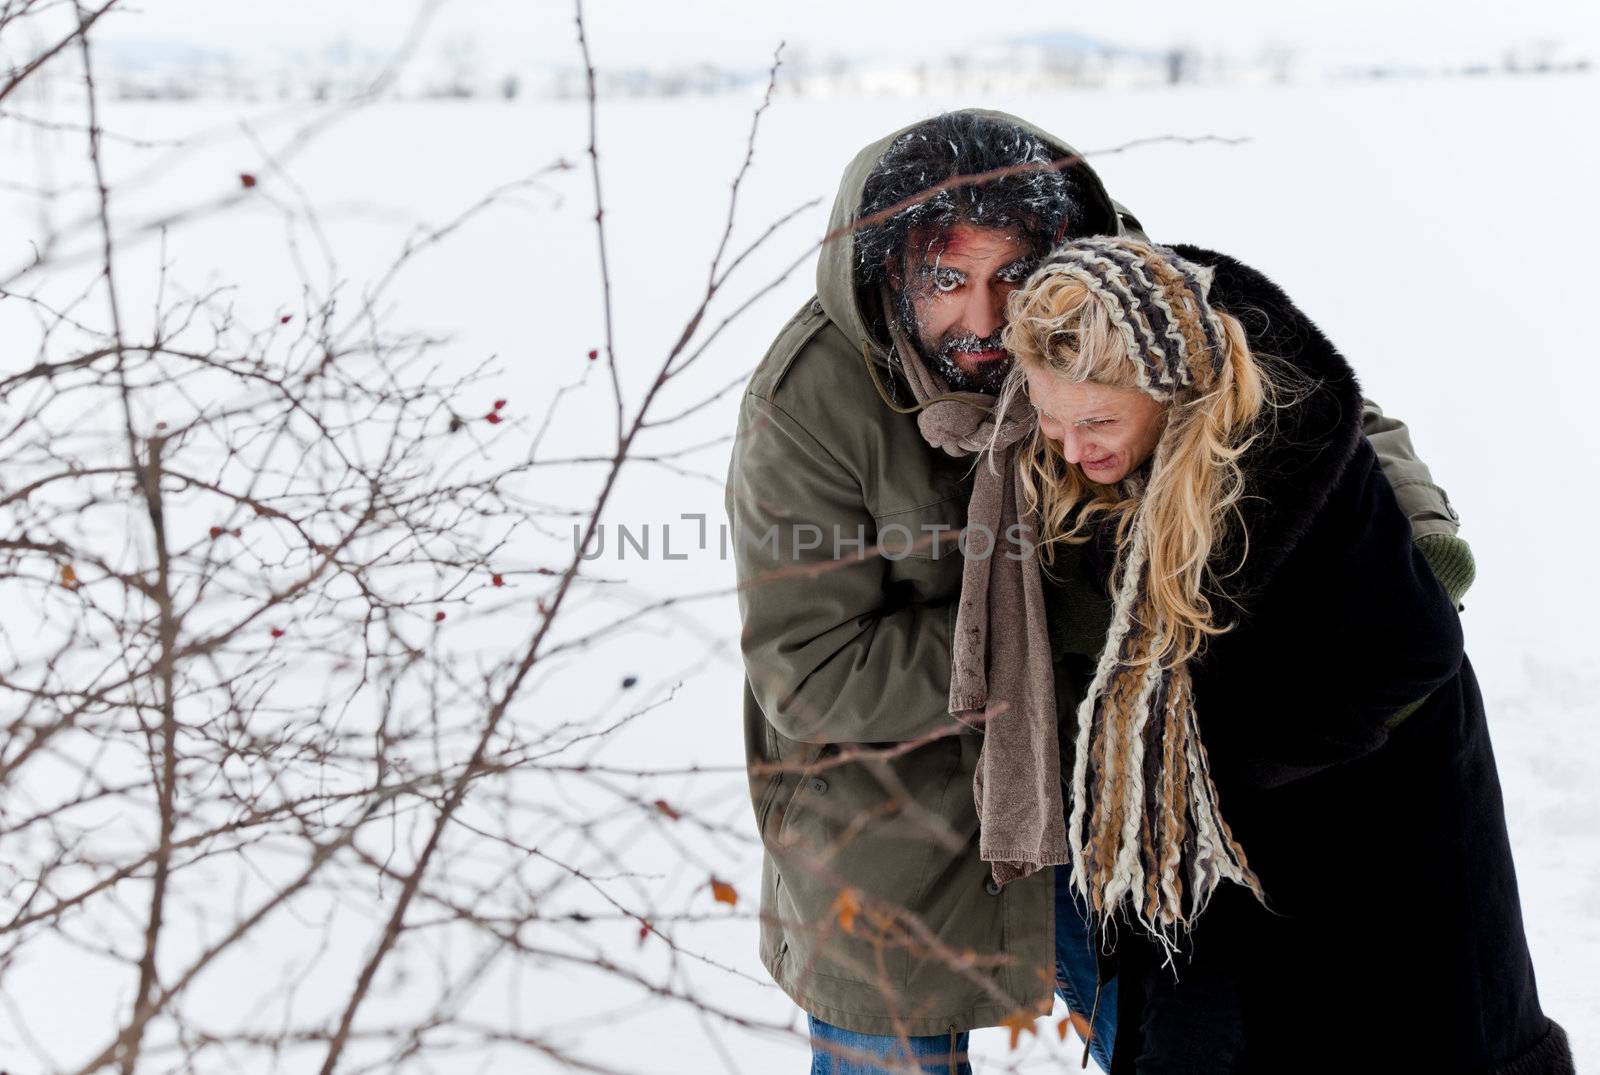 Frozen homeless couple struggling in winter time or kidnaping